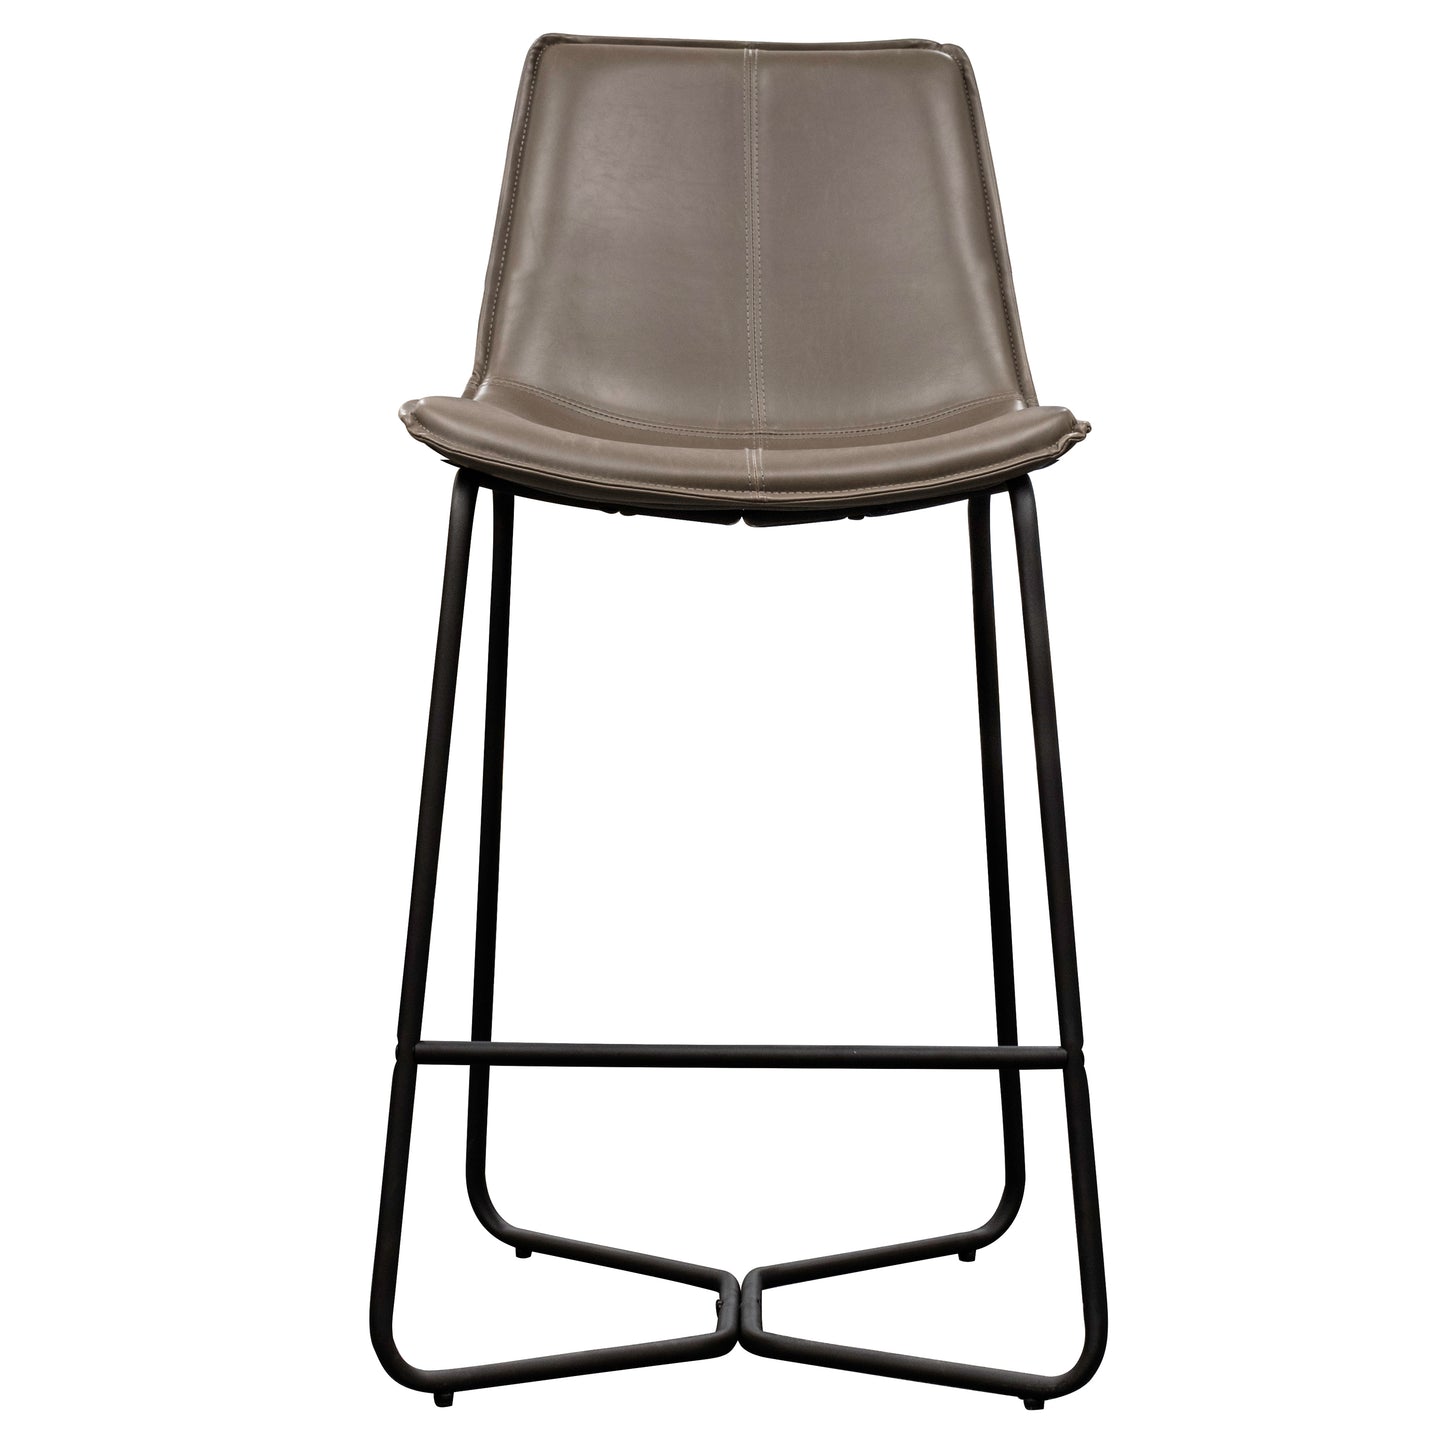 A sleek Slapton Stool Brister (2pk) with a black frame, perfect for interior decor and home furniture.